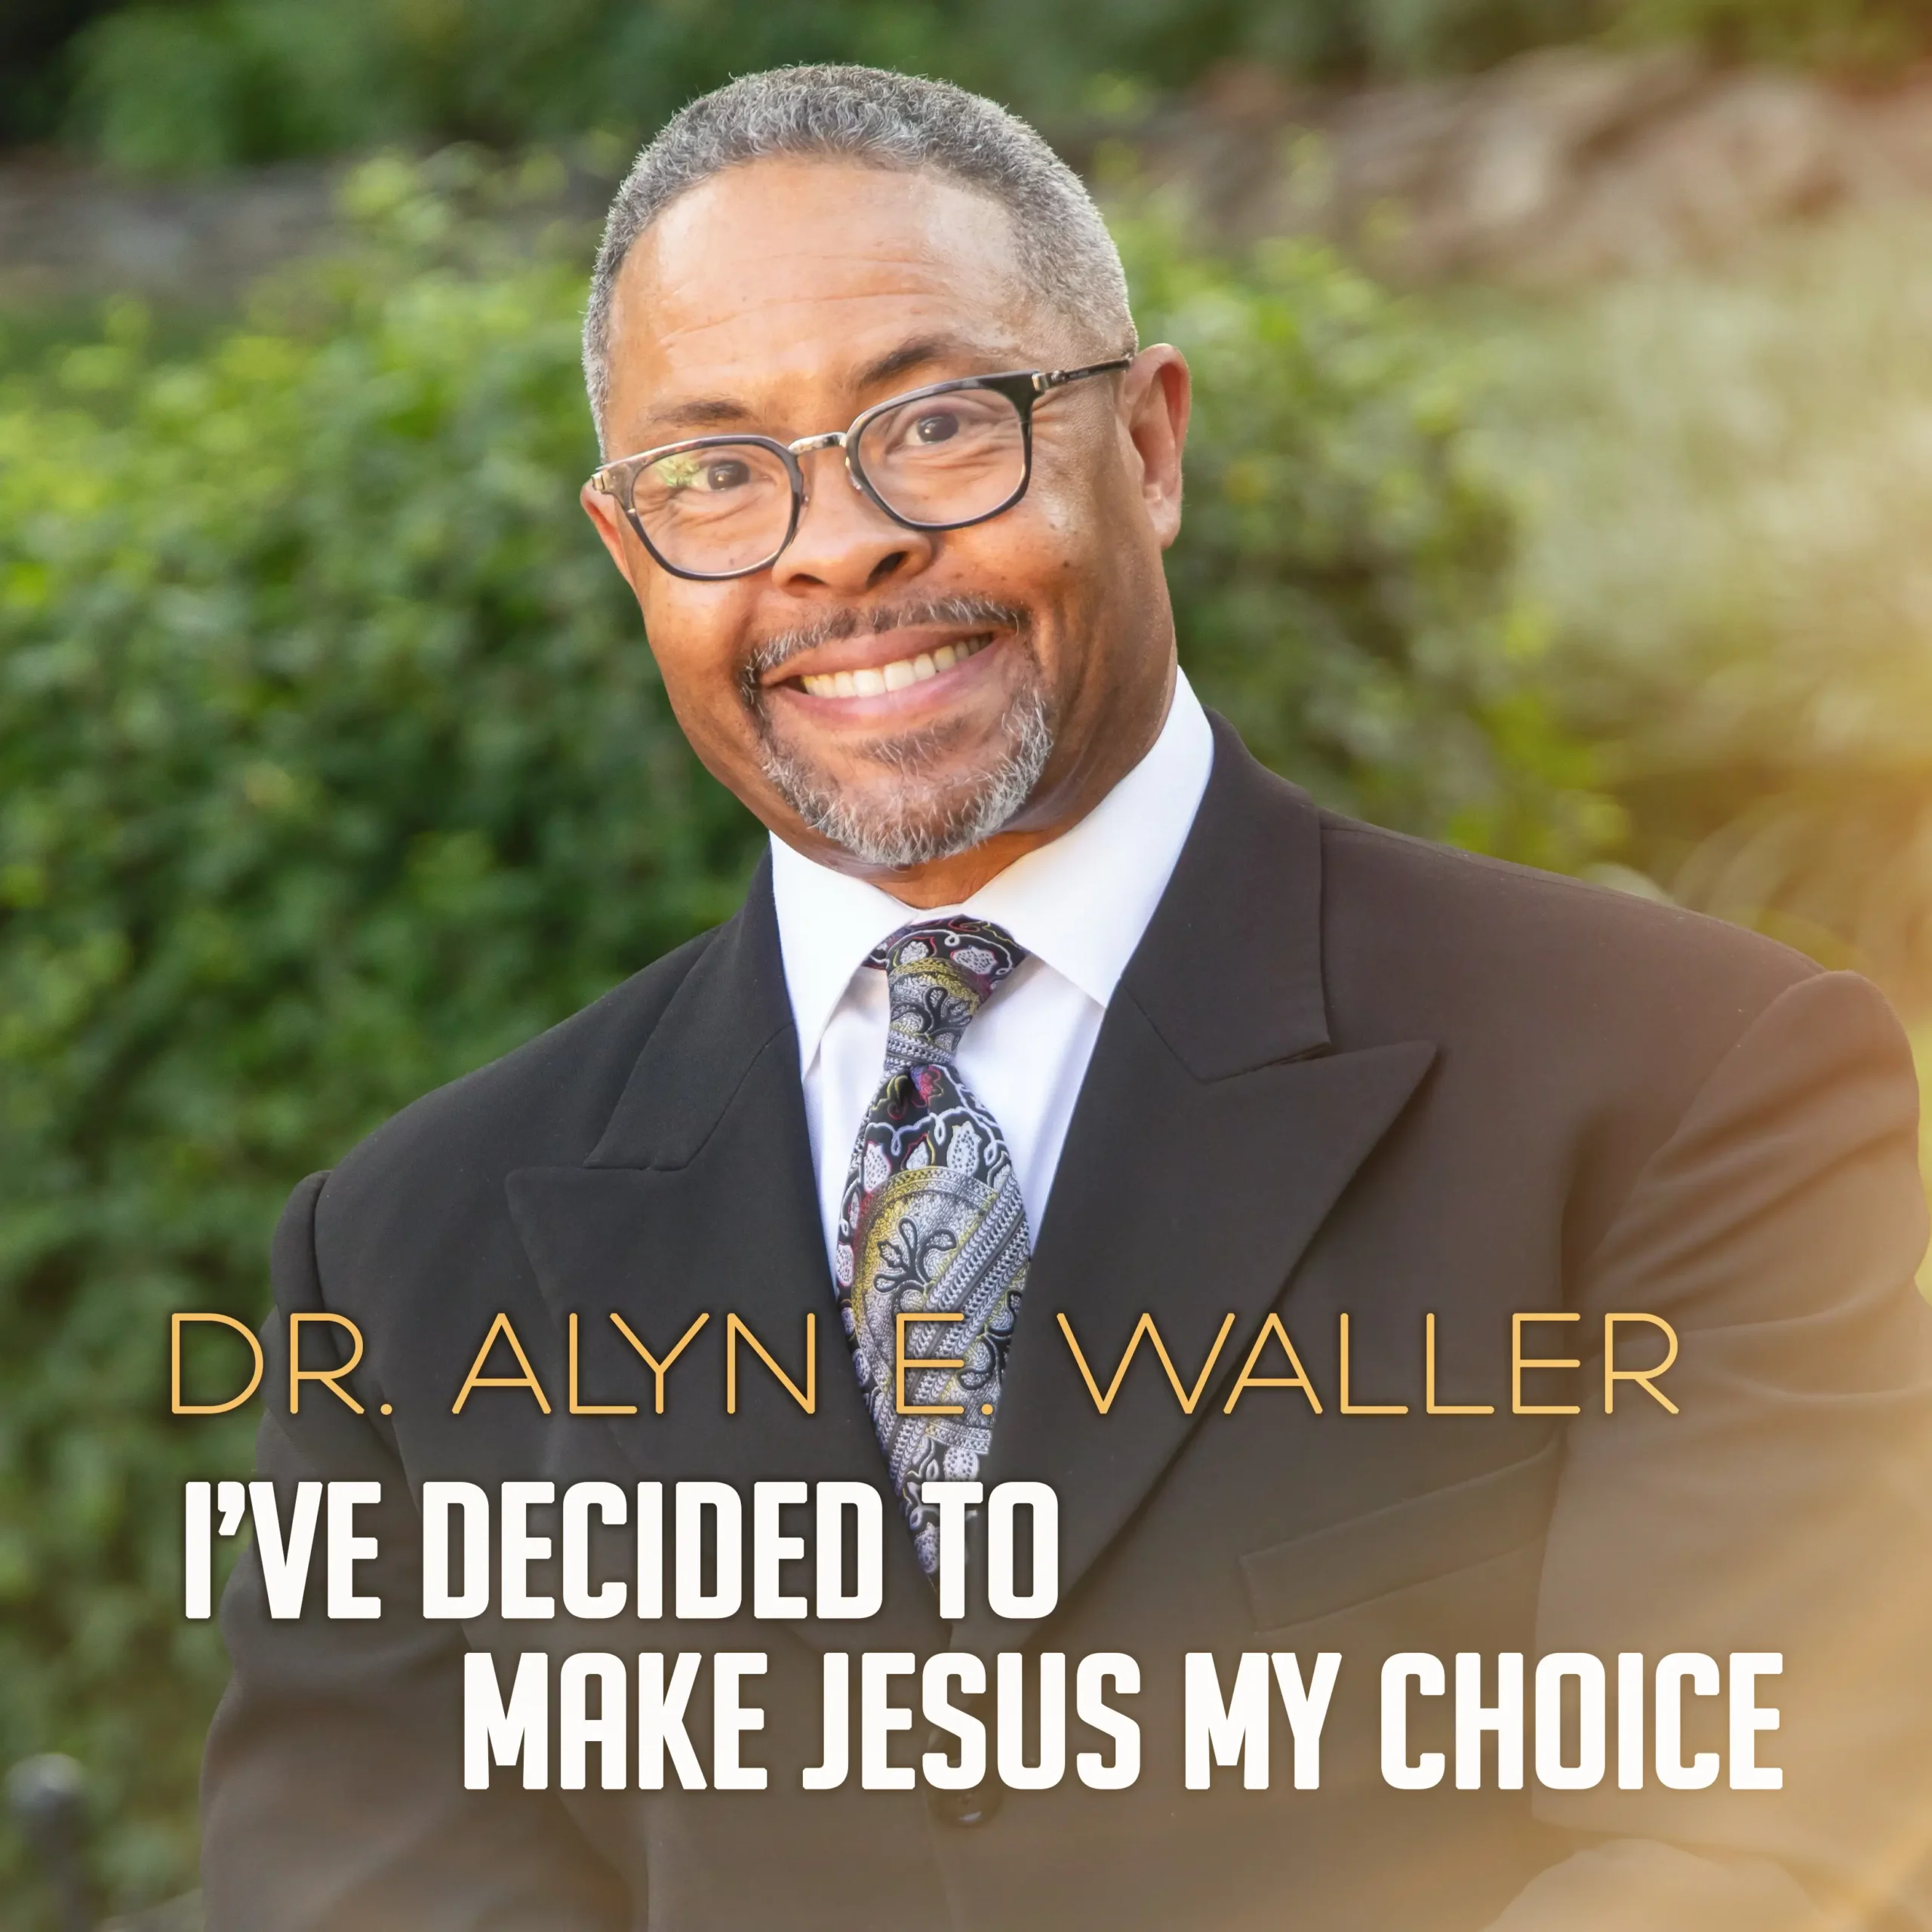 Dr Alyn E Waller Ive Decided to Make Jesus My Choice.